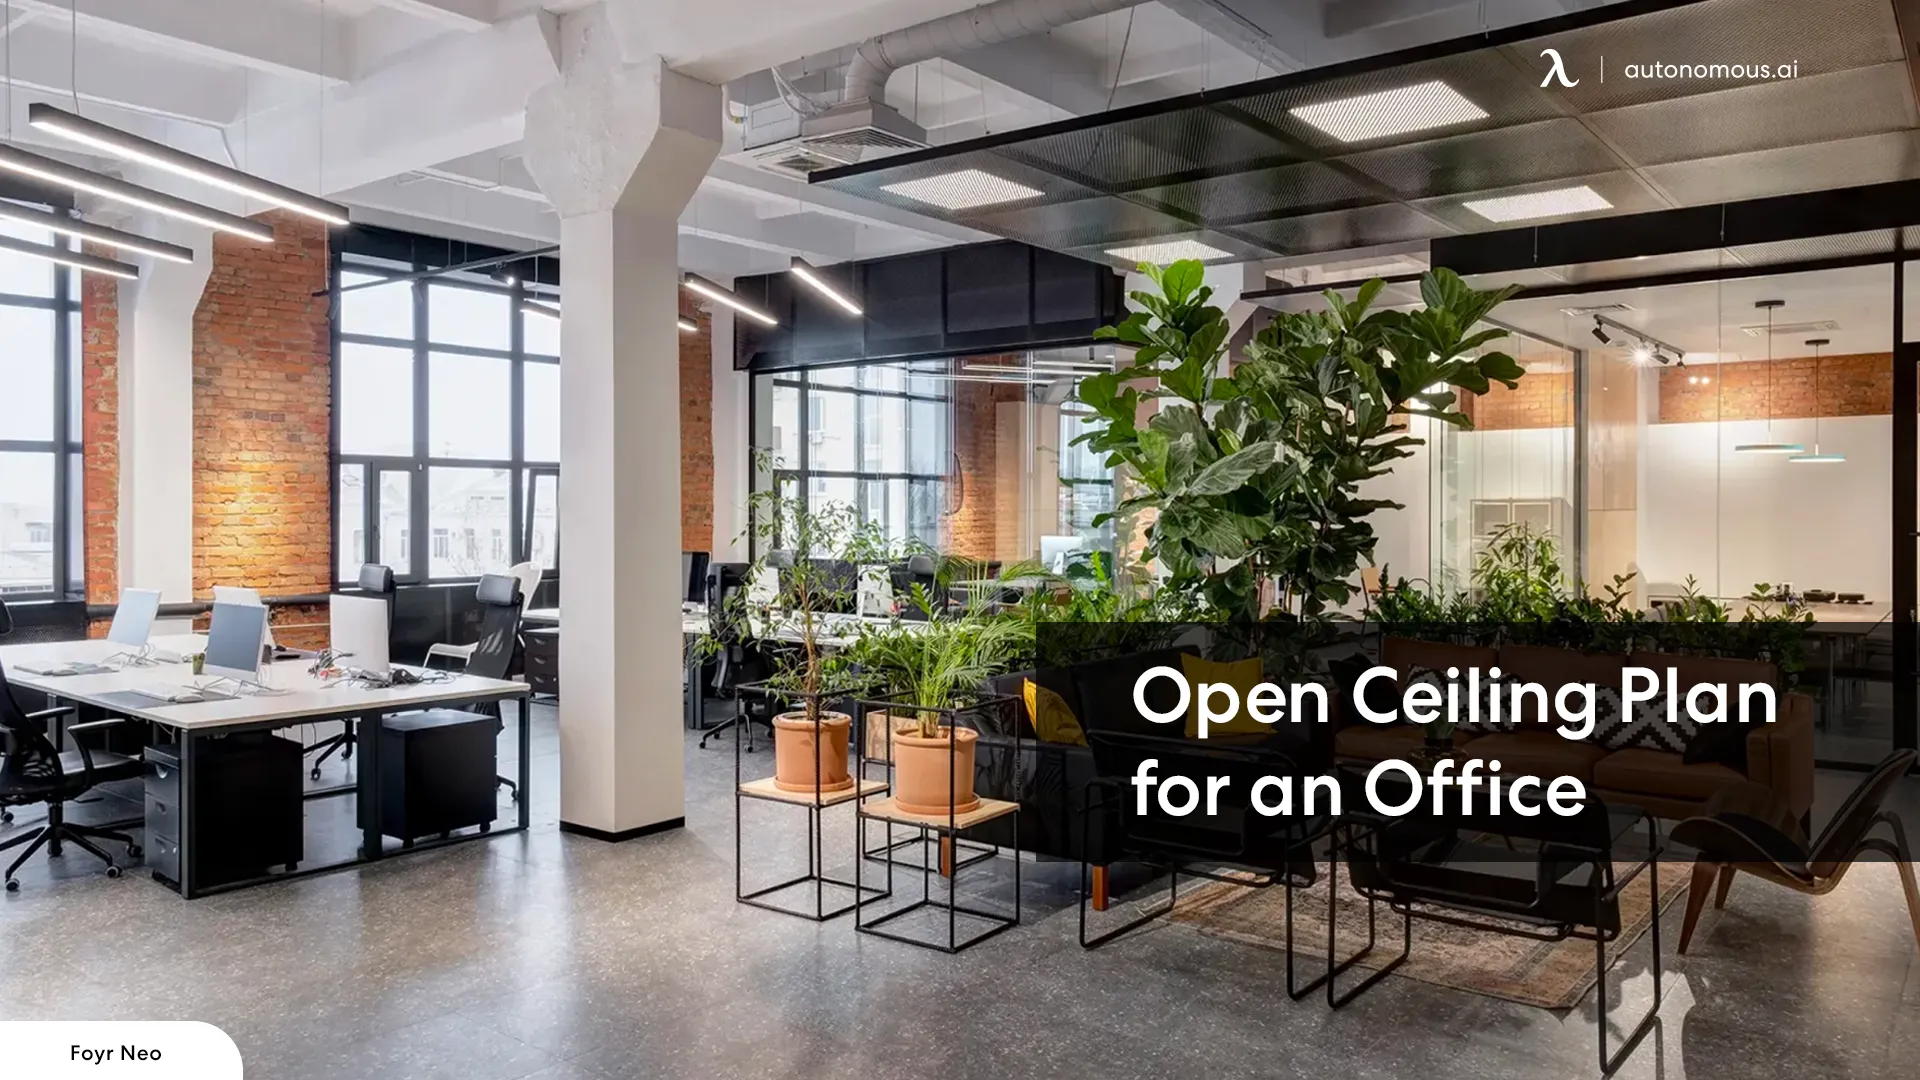 Light and Airy: The Benefits of an Open Ceiling Office Layout